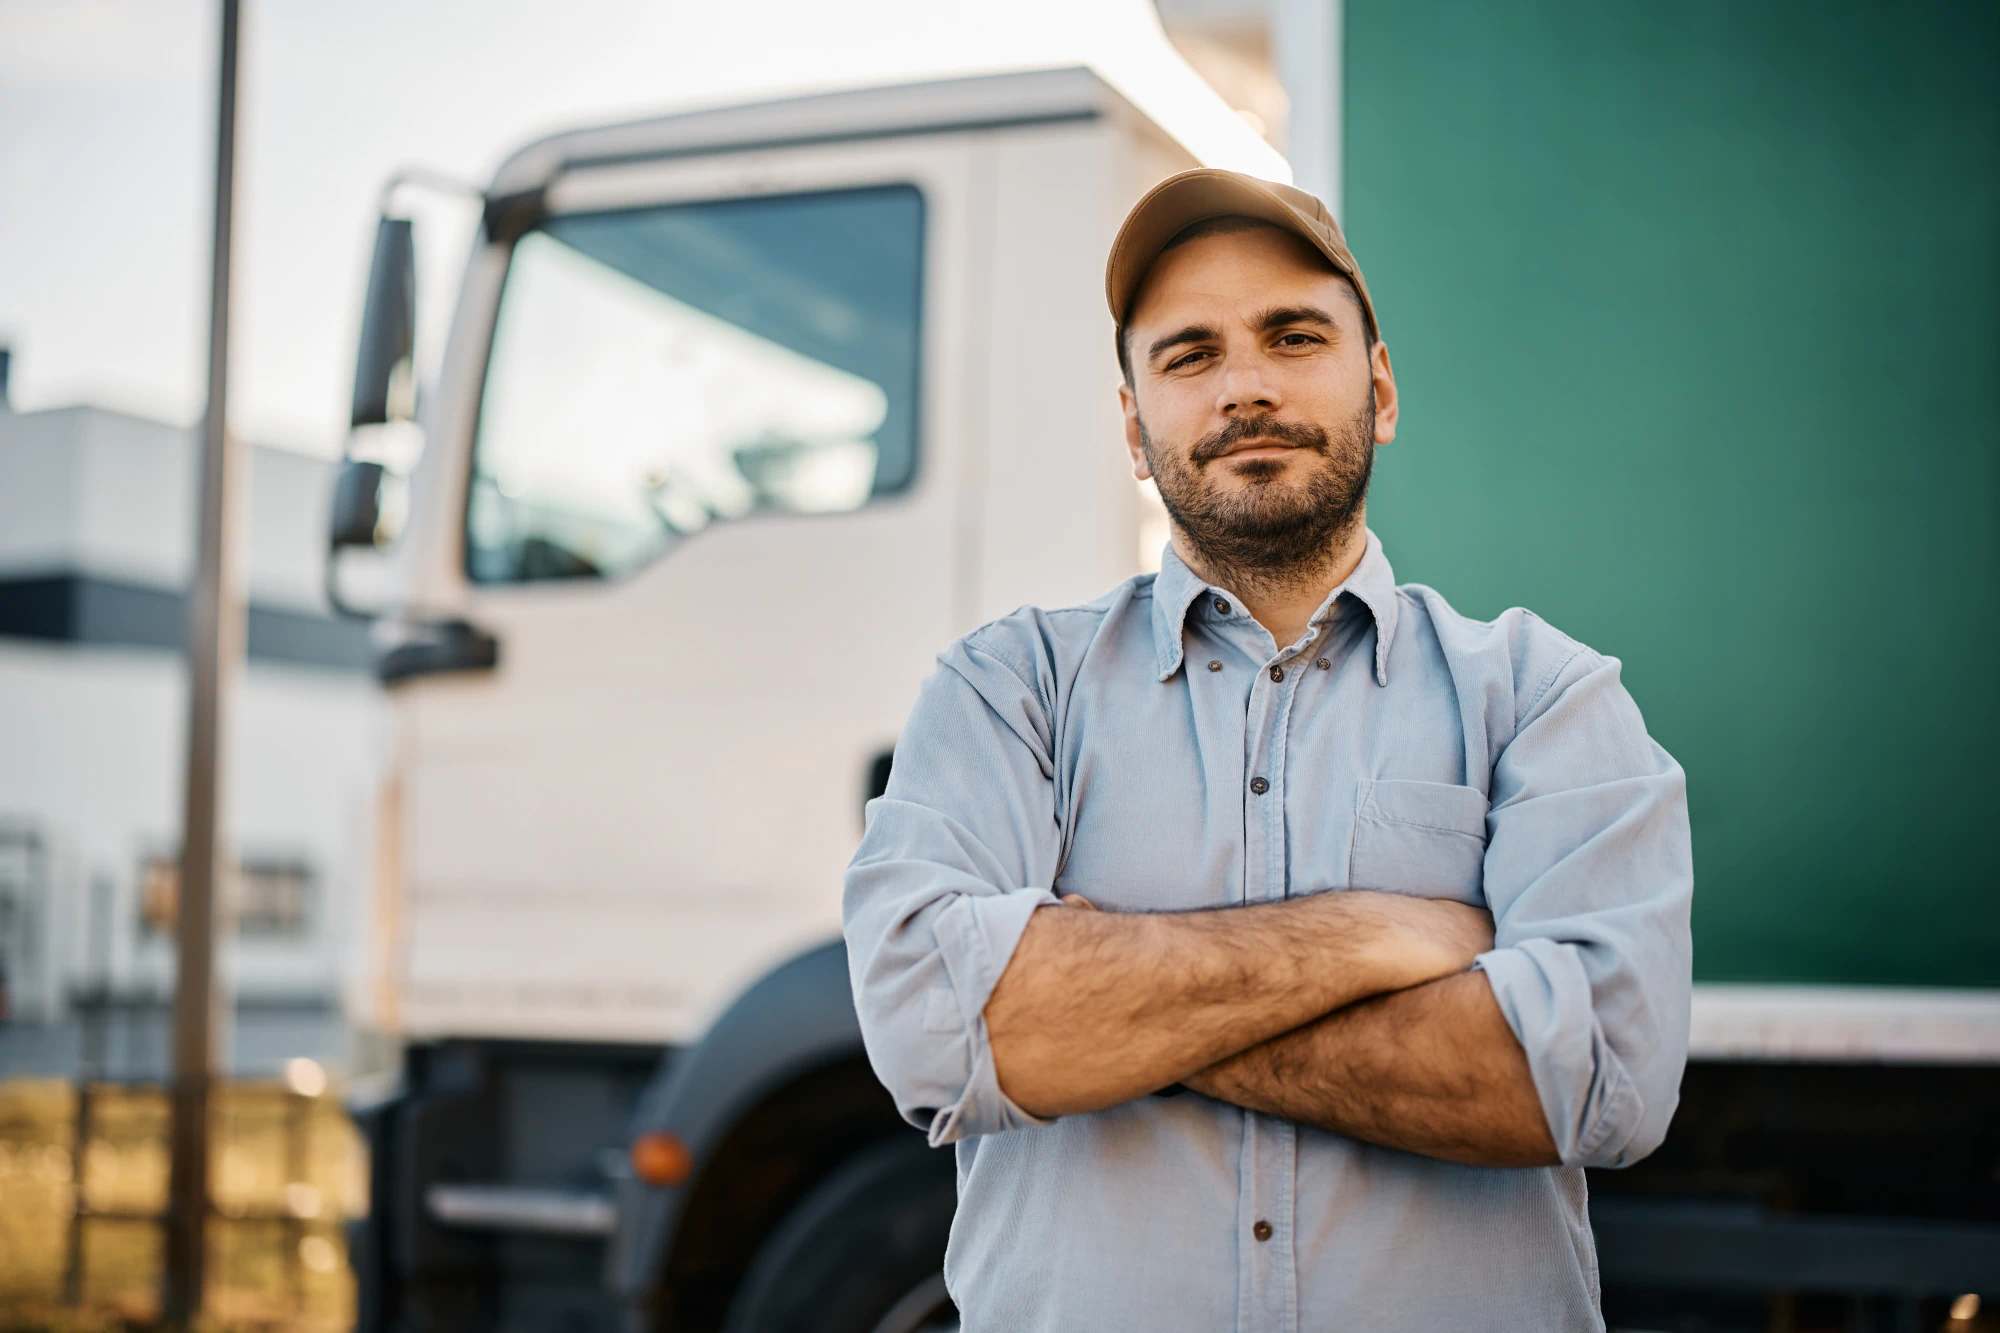 Truck driver standing in front of his truck looking at the camera with crossed arms.